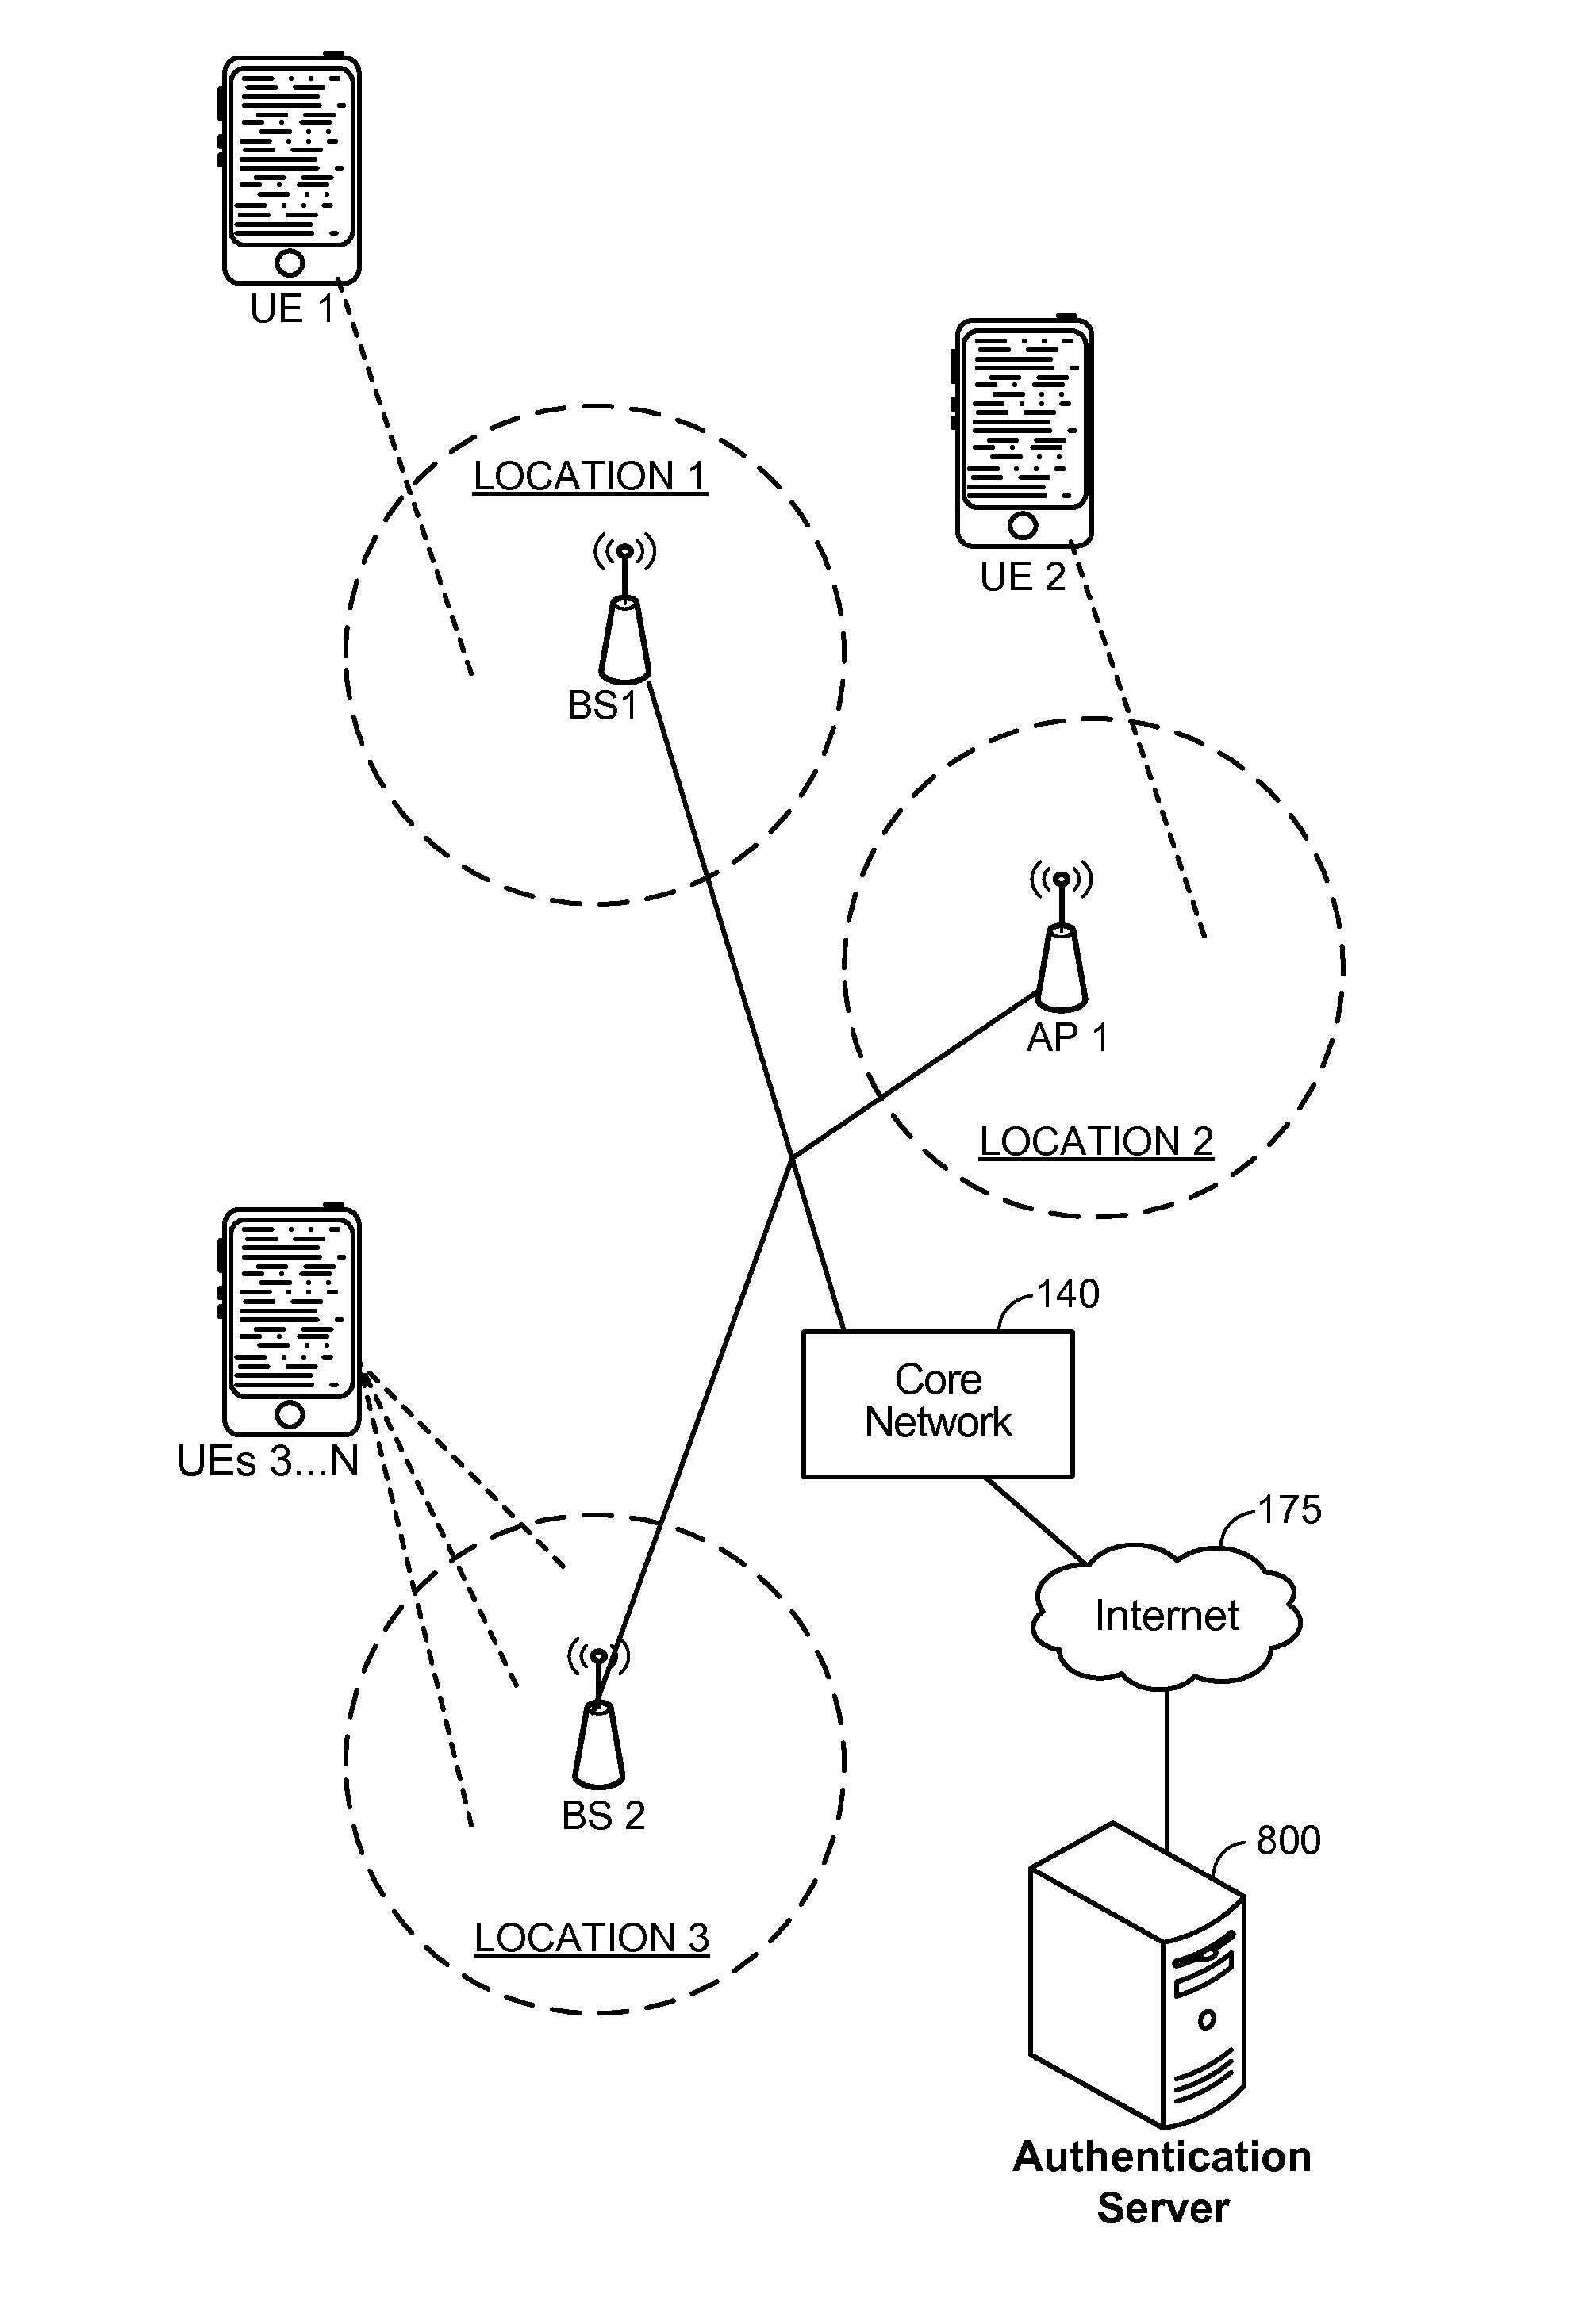 Selectively authenticating a group of devices as being in a shared environment based on locally captured ambient sound